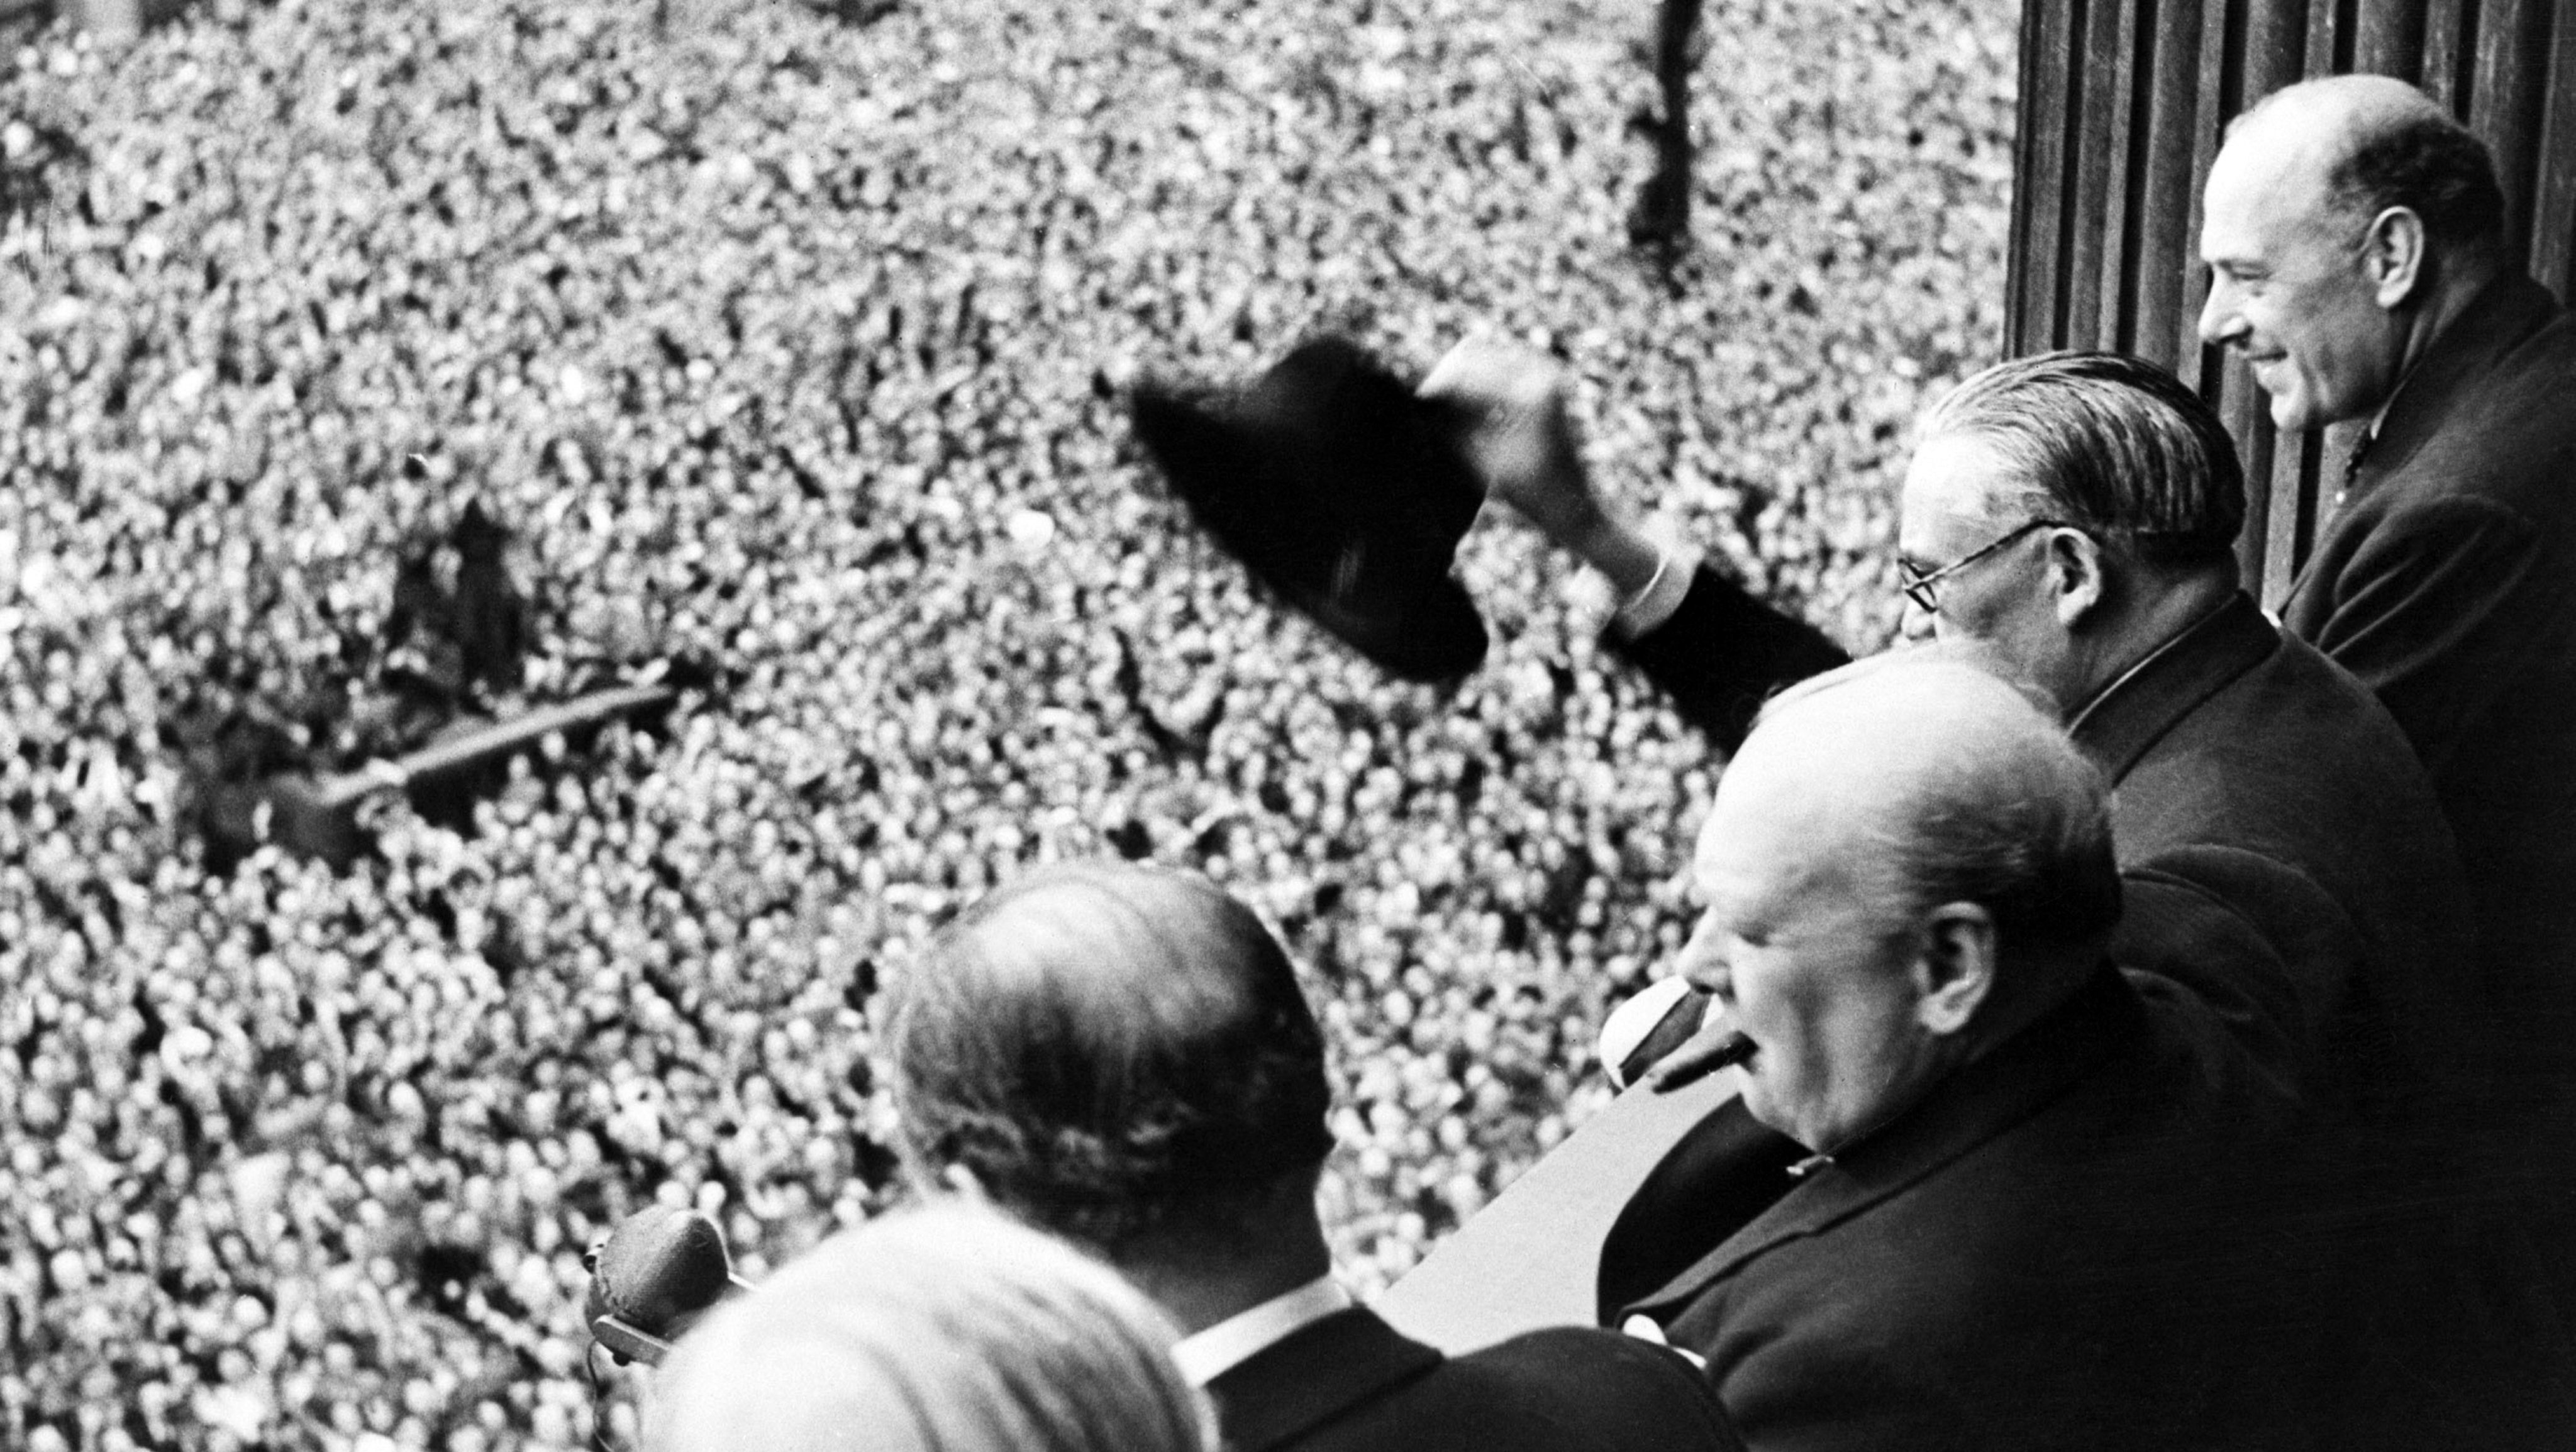 Sir Winston Churchill looking out over crowds celebrating the end of the Second World War in London.